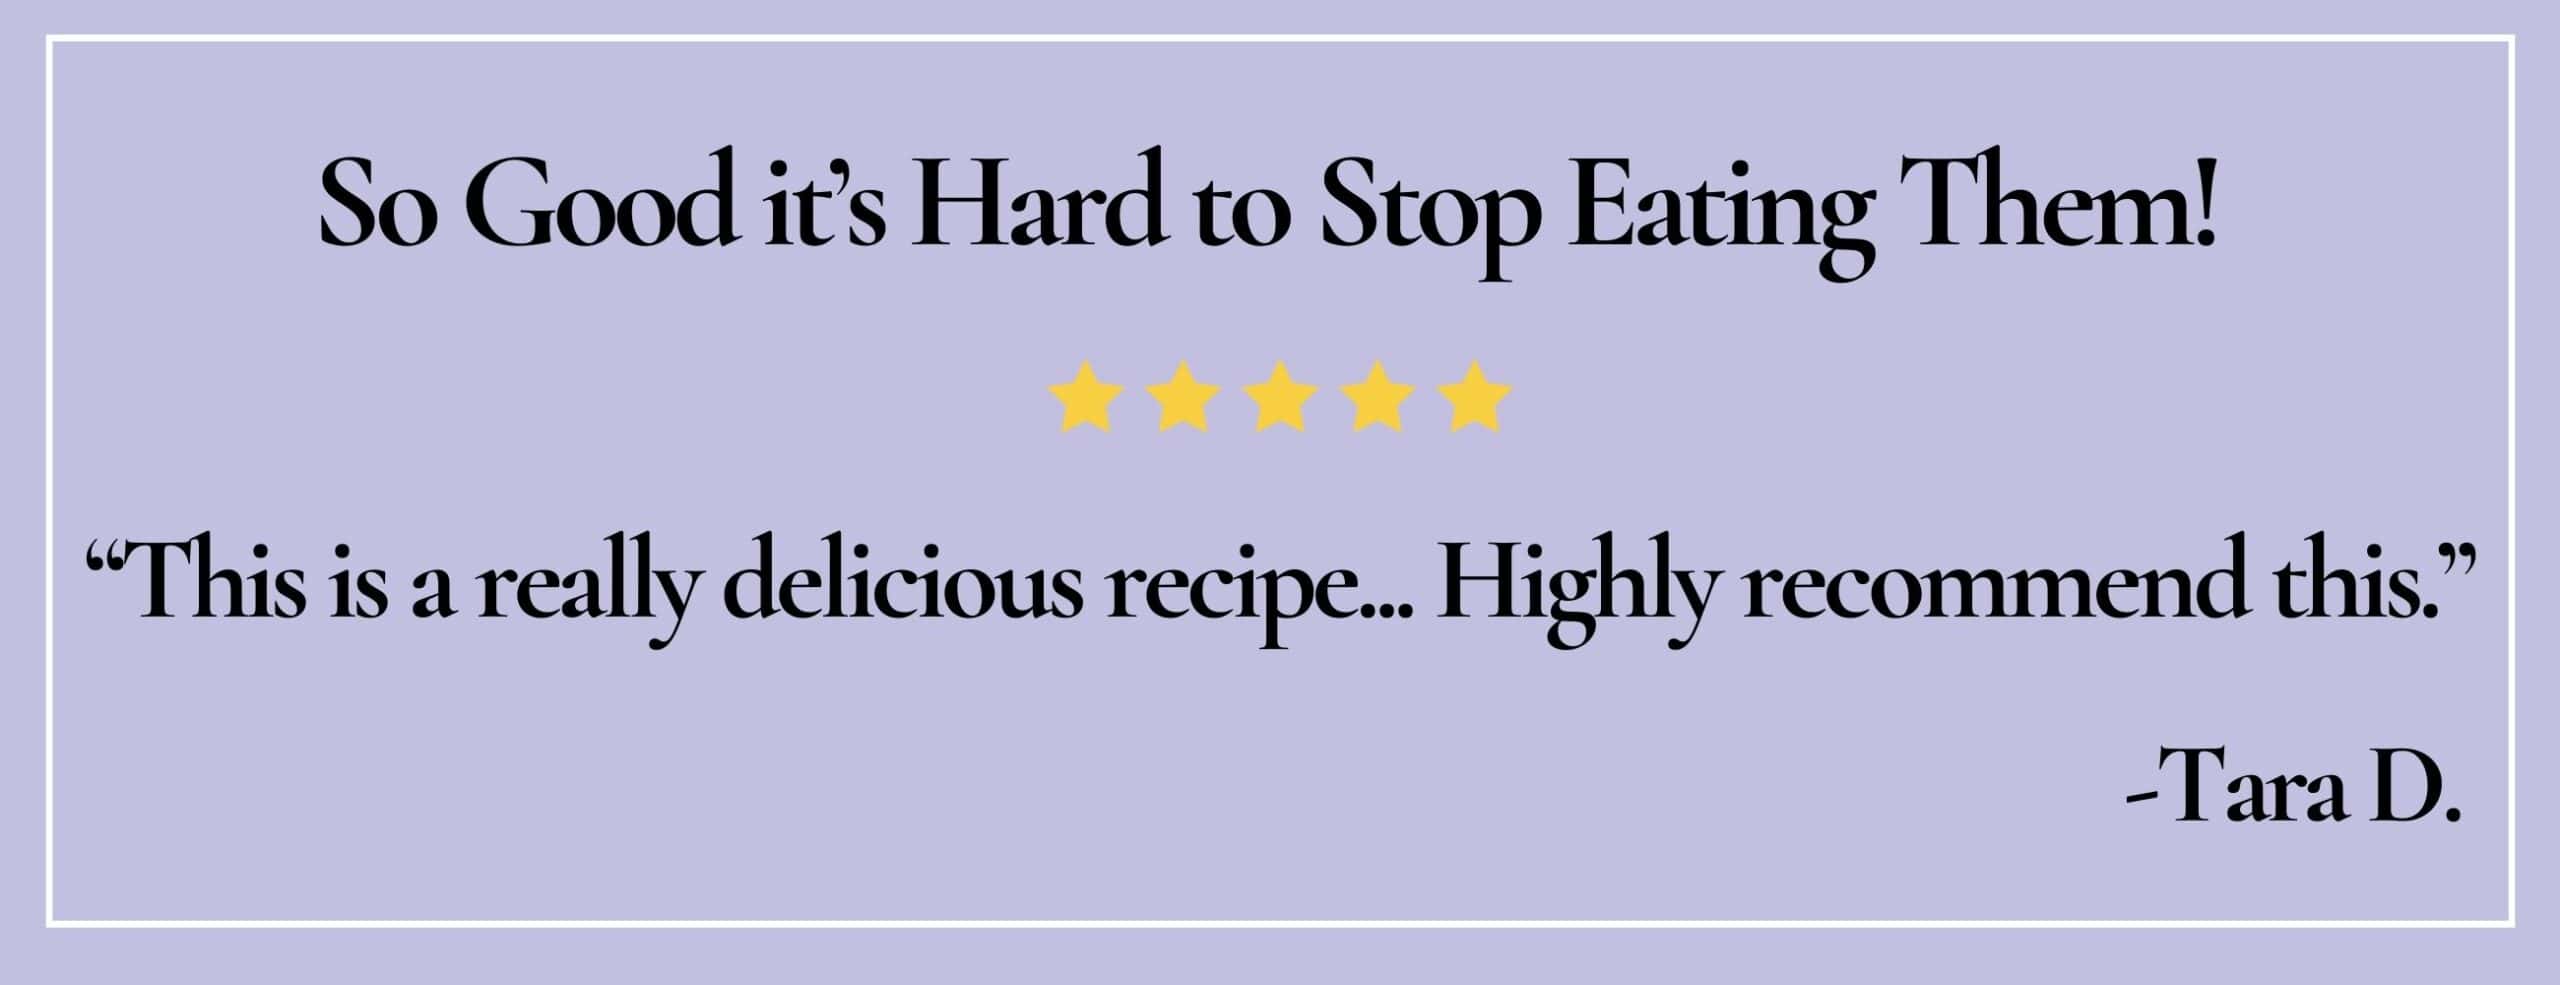 Text box with paraphrase: So good, it's hard to stop eating them! This is a really delicious recipe...-Tara D.